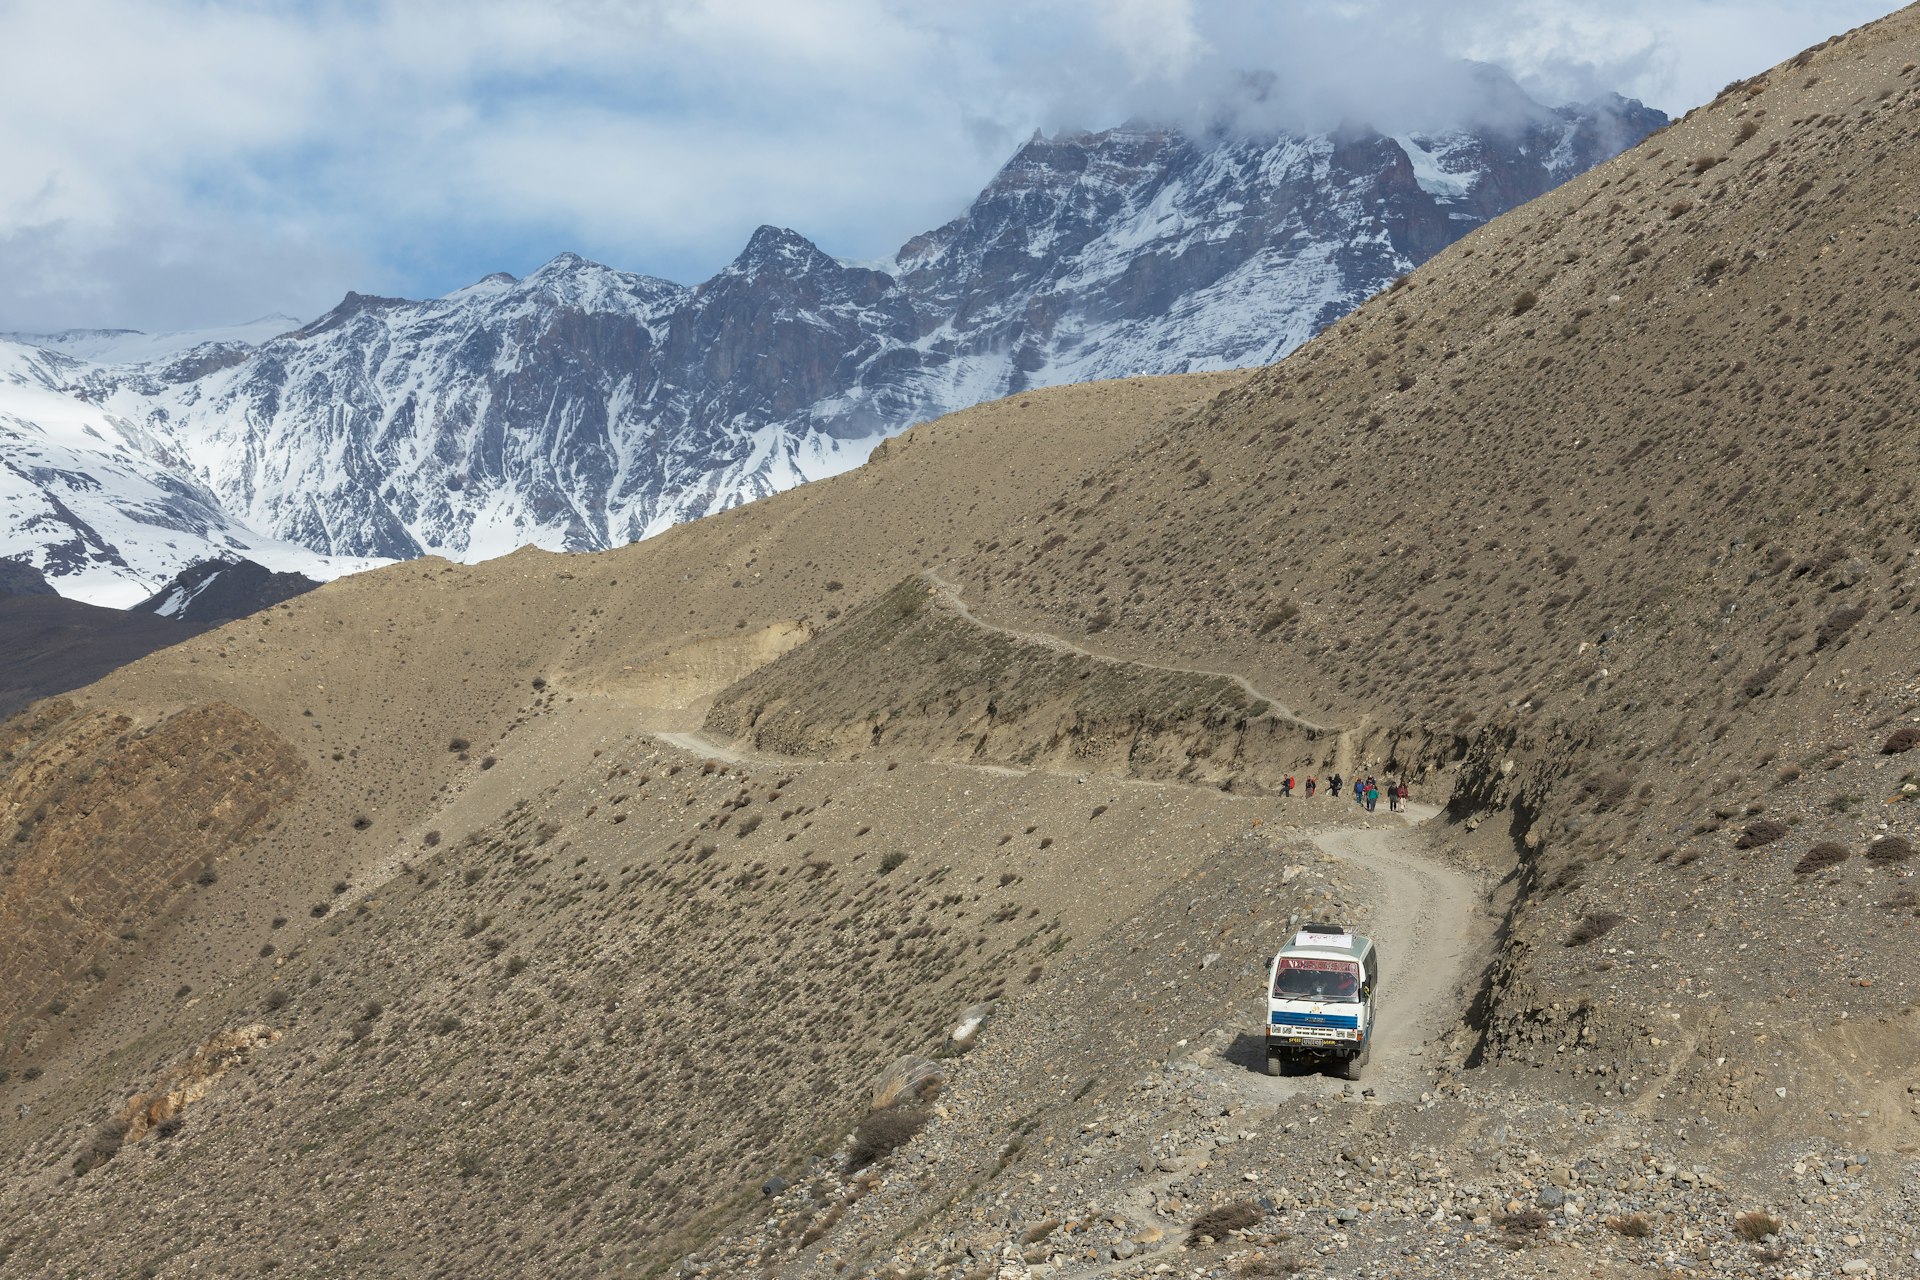 A bus seen from above with the Himalayas in the distance on the dusty road between Jomsom and Muktinath, Nepal